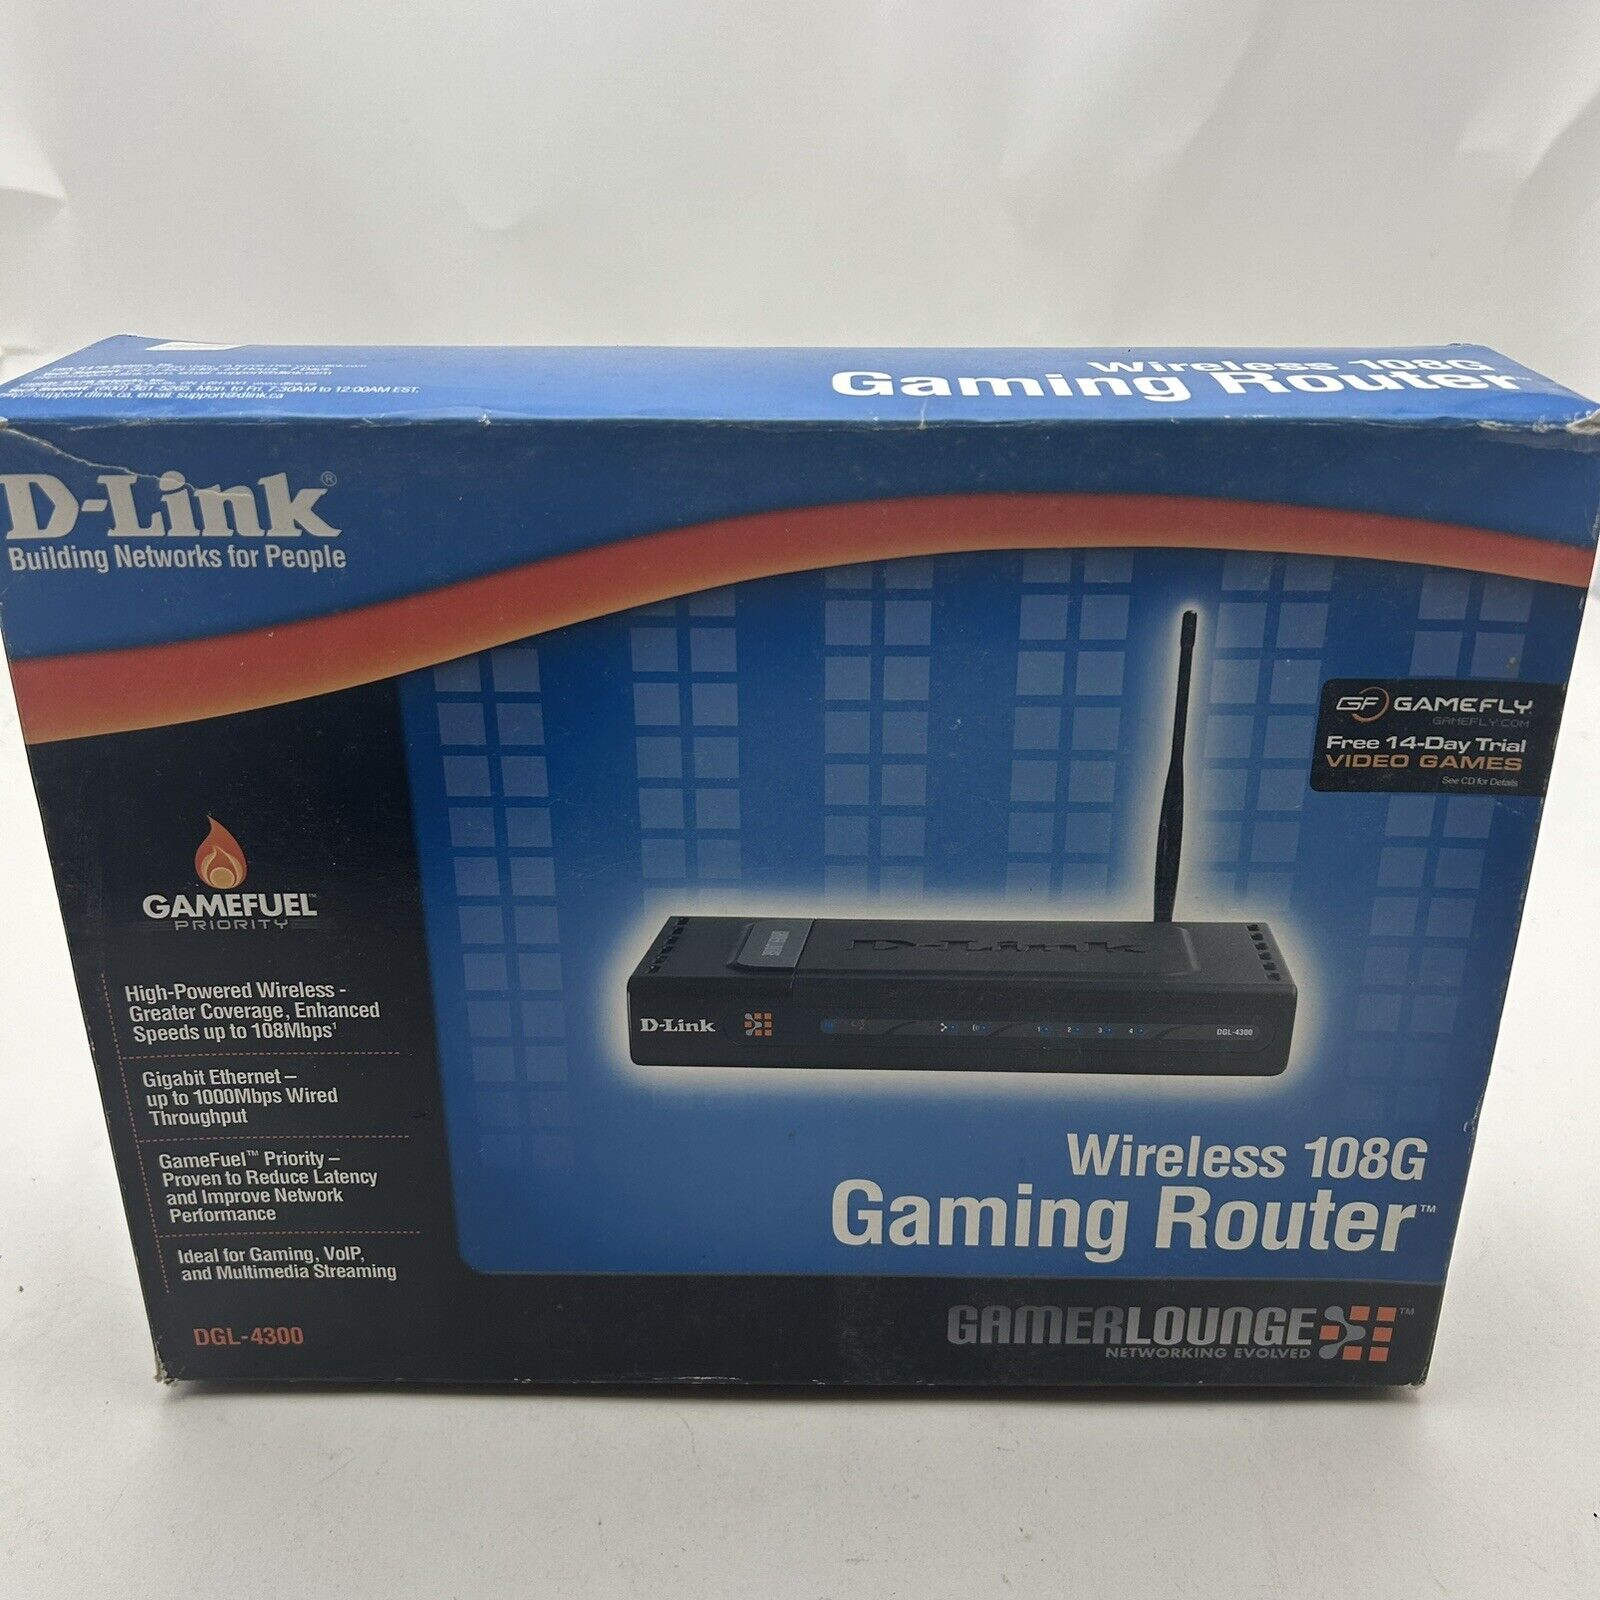 D-Link Wireless 108G Gaming Router